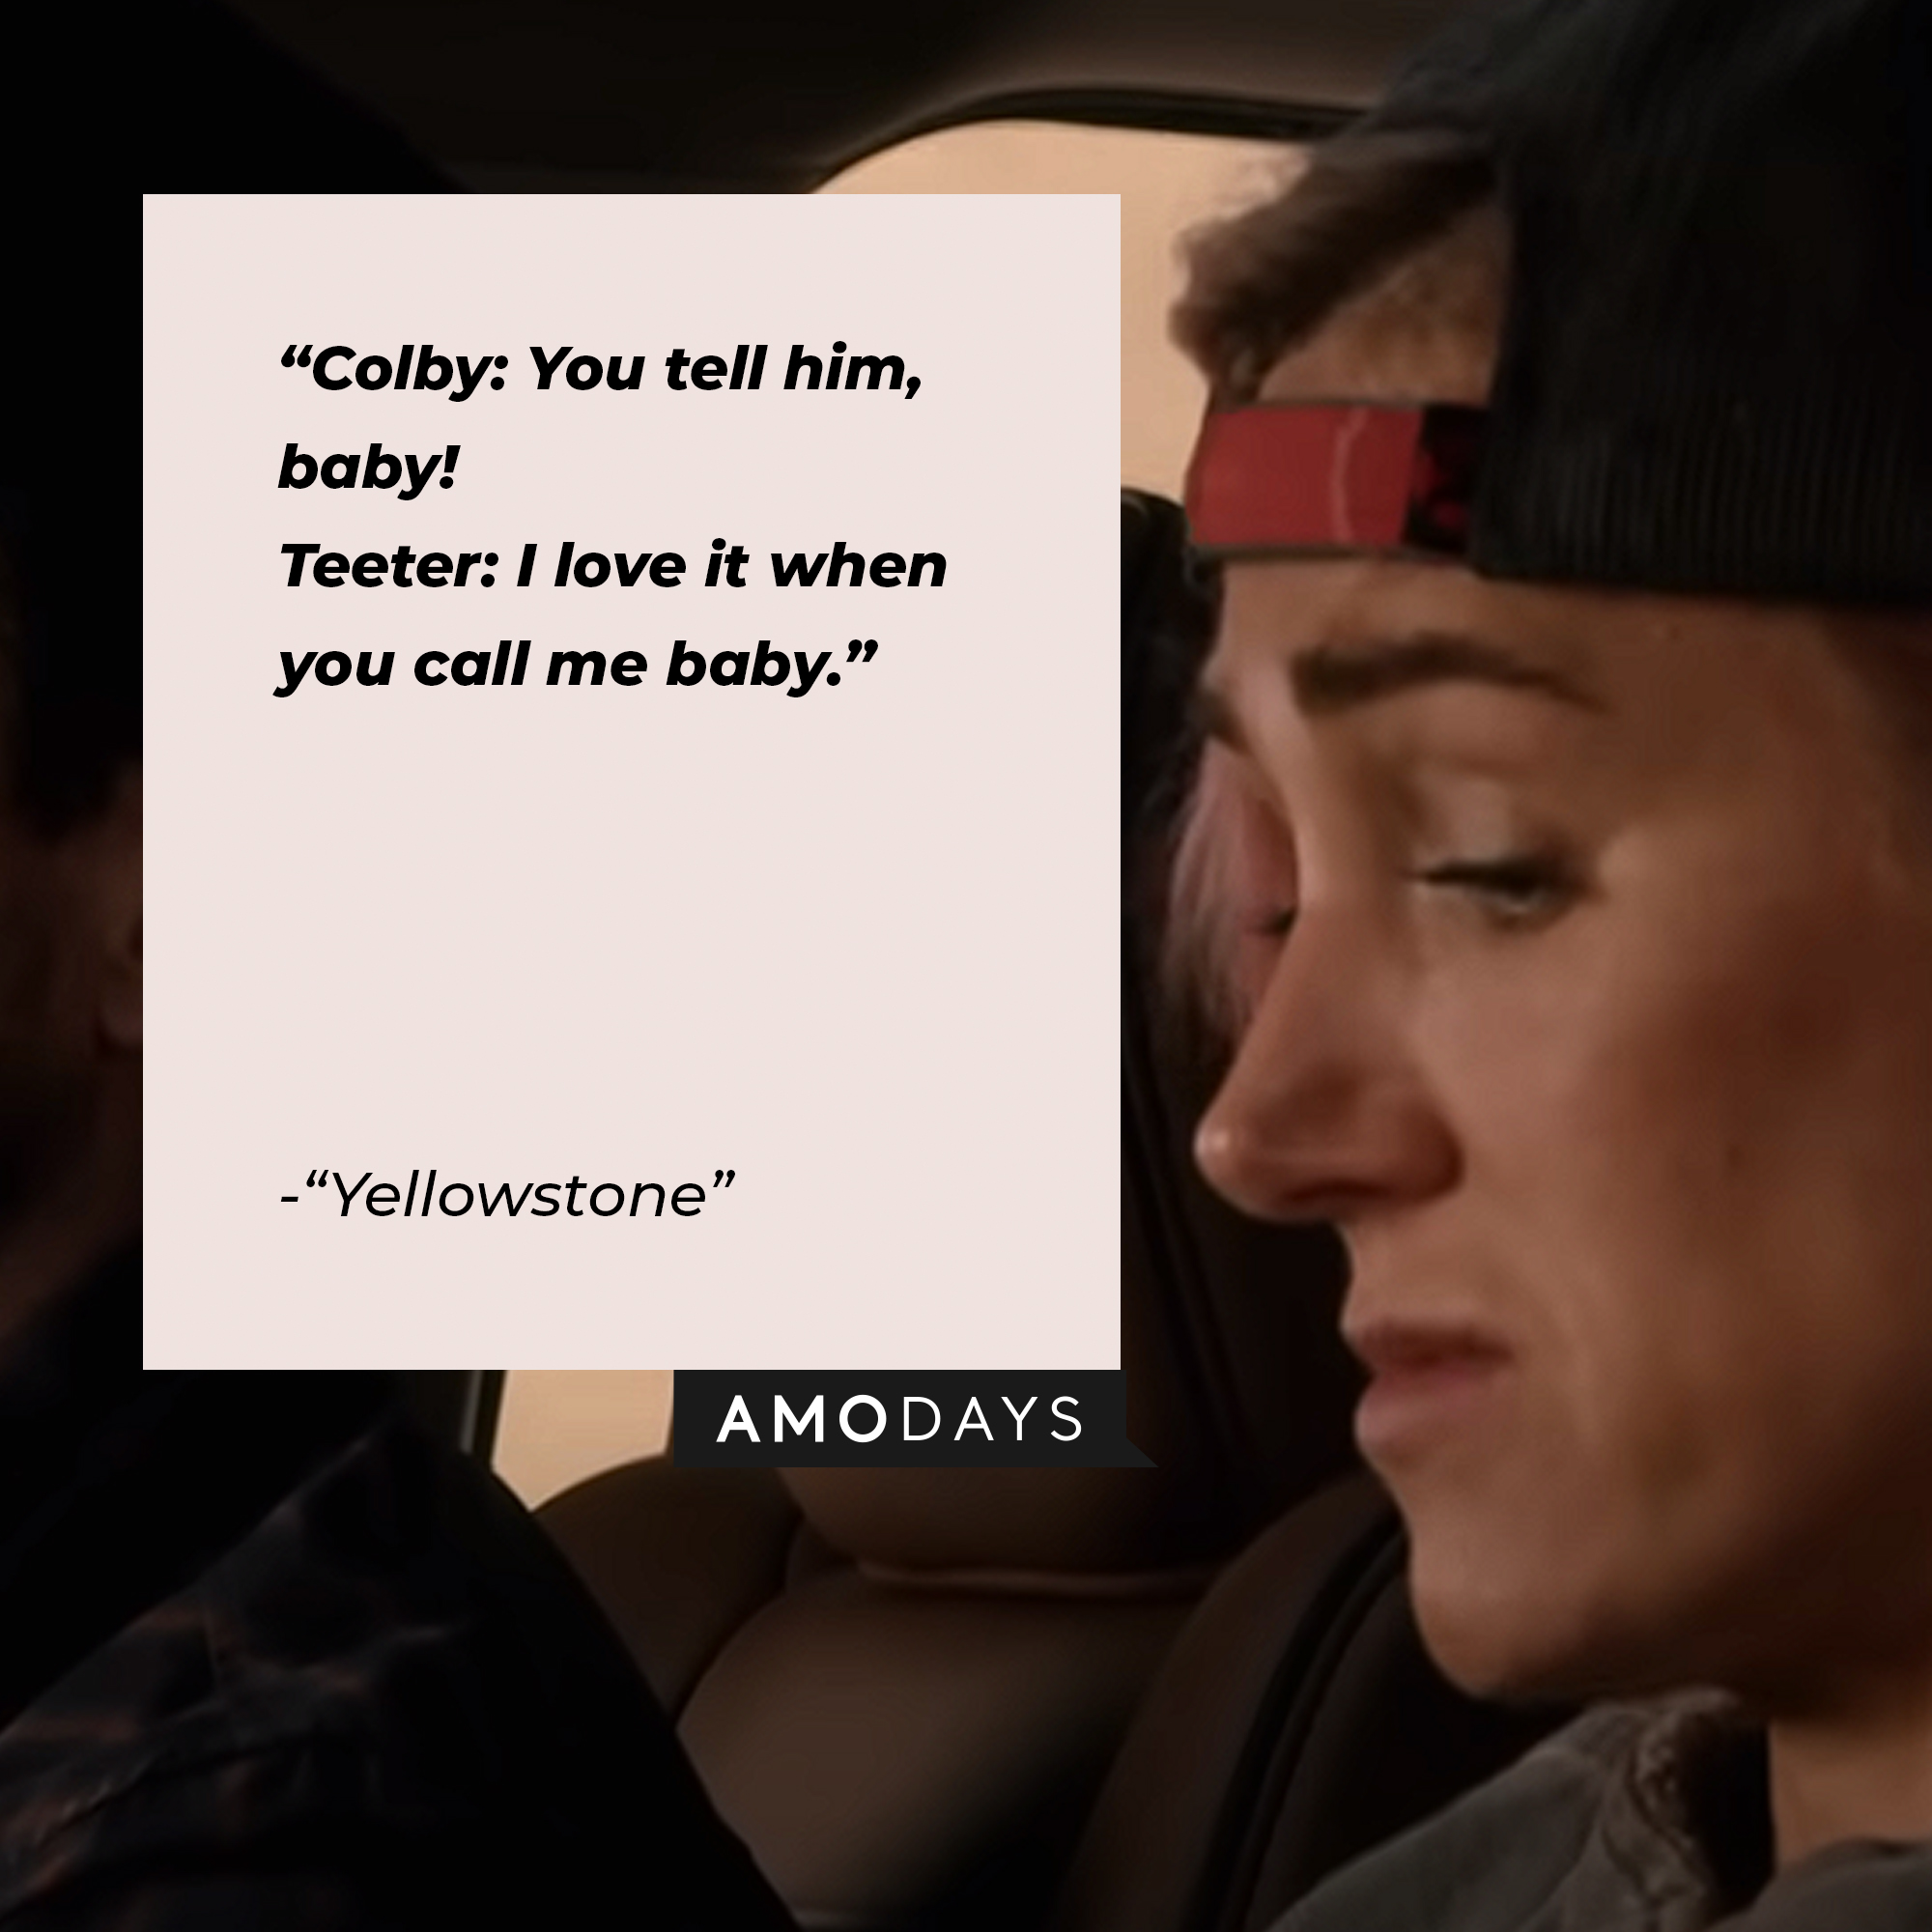 Quote from “Yellowstone”: “Colby: You tell him, baby!  Teeter: I love it when you call me baby.” | Source: youtube.com/yellowstone